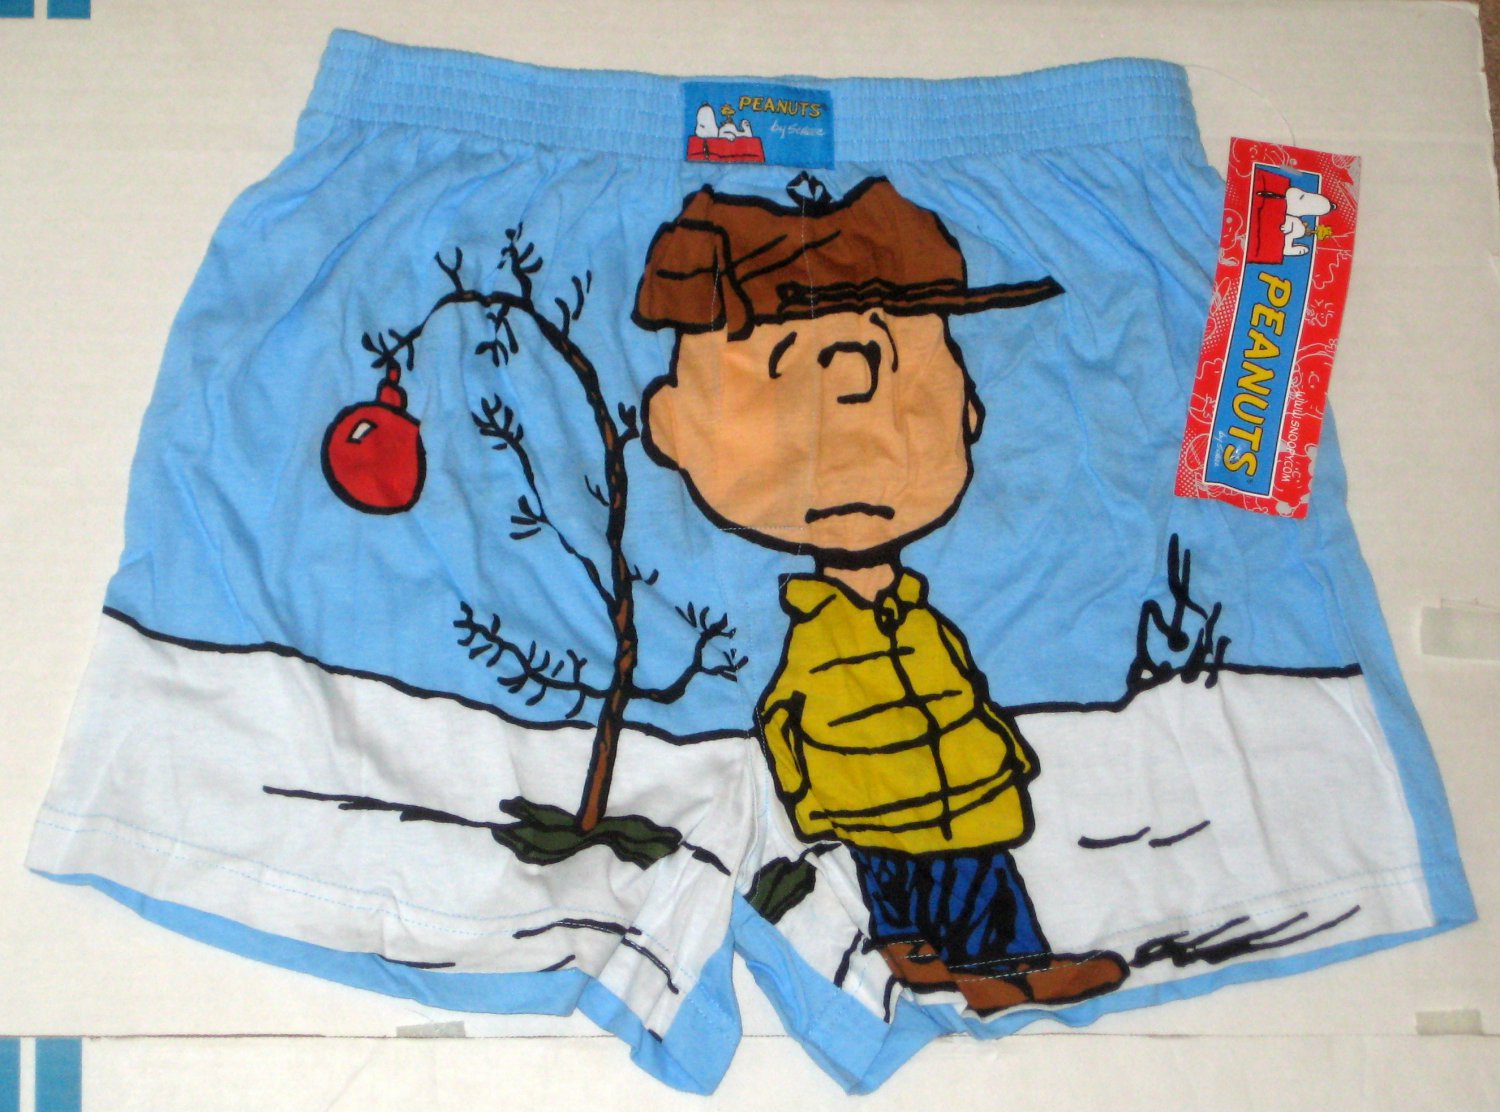 Peanuts Gang Extra Large XL 40-42 Christmas Boxer Shorts Underwear Blue Tree Charlie Brown NWT